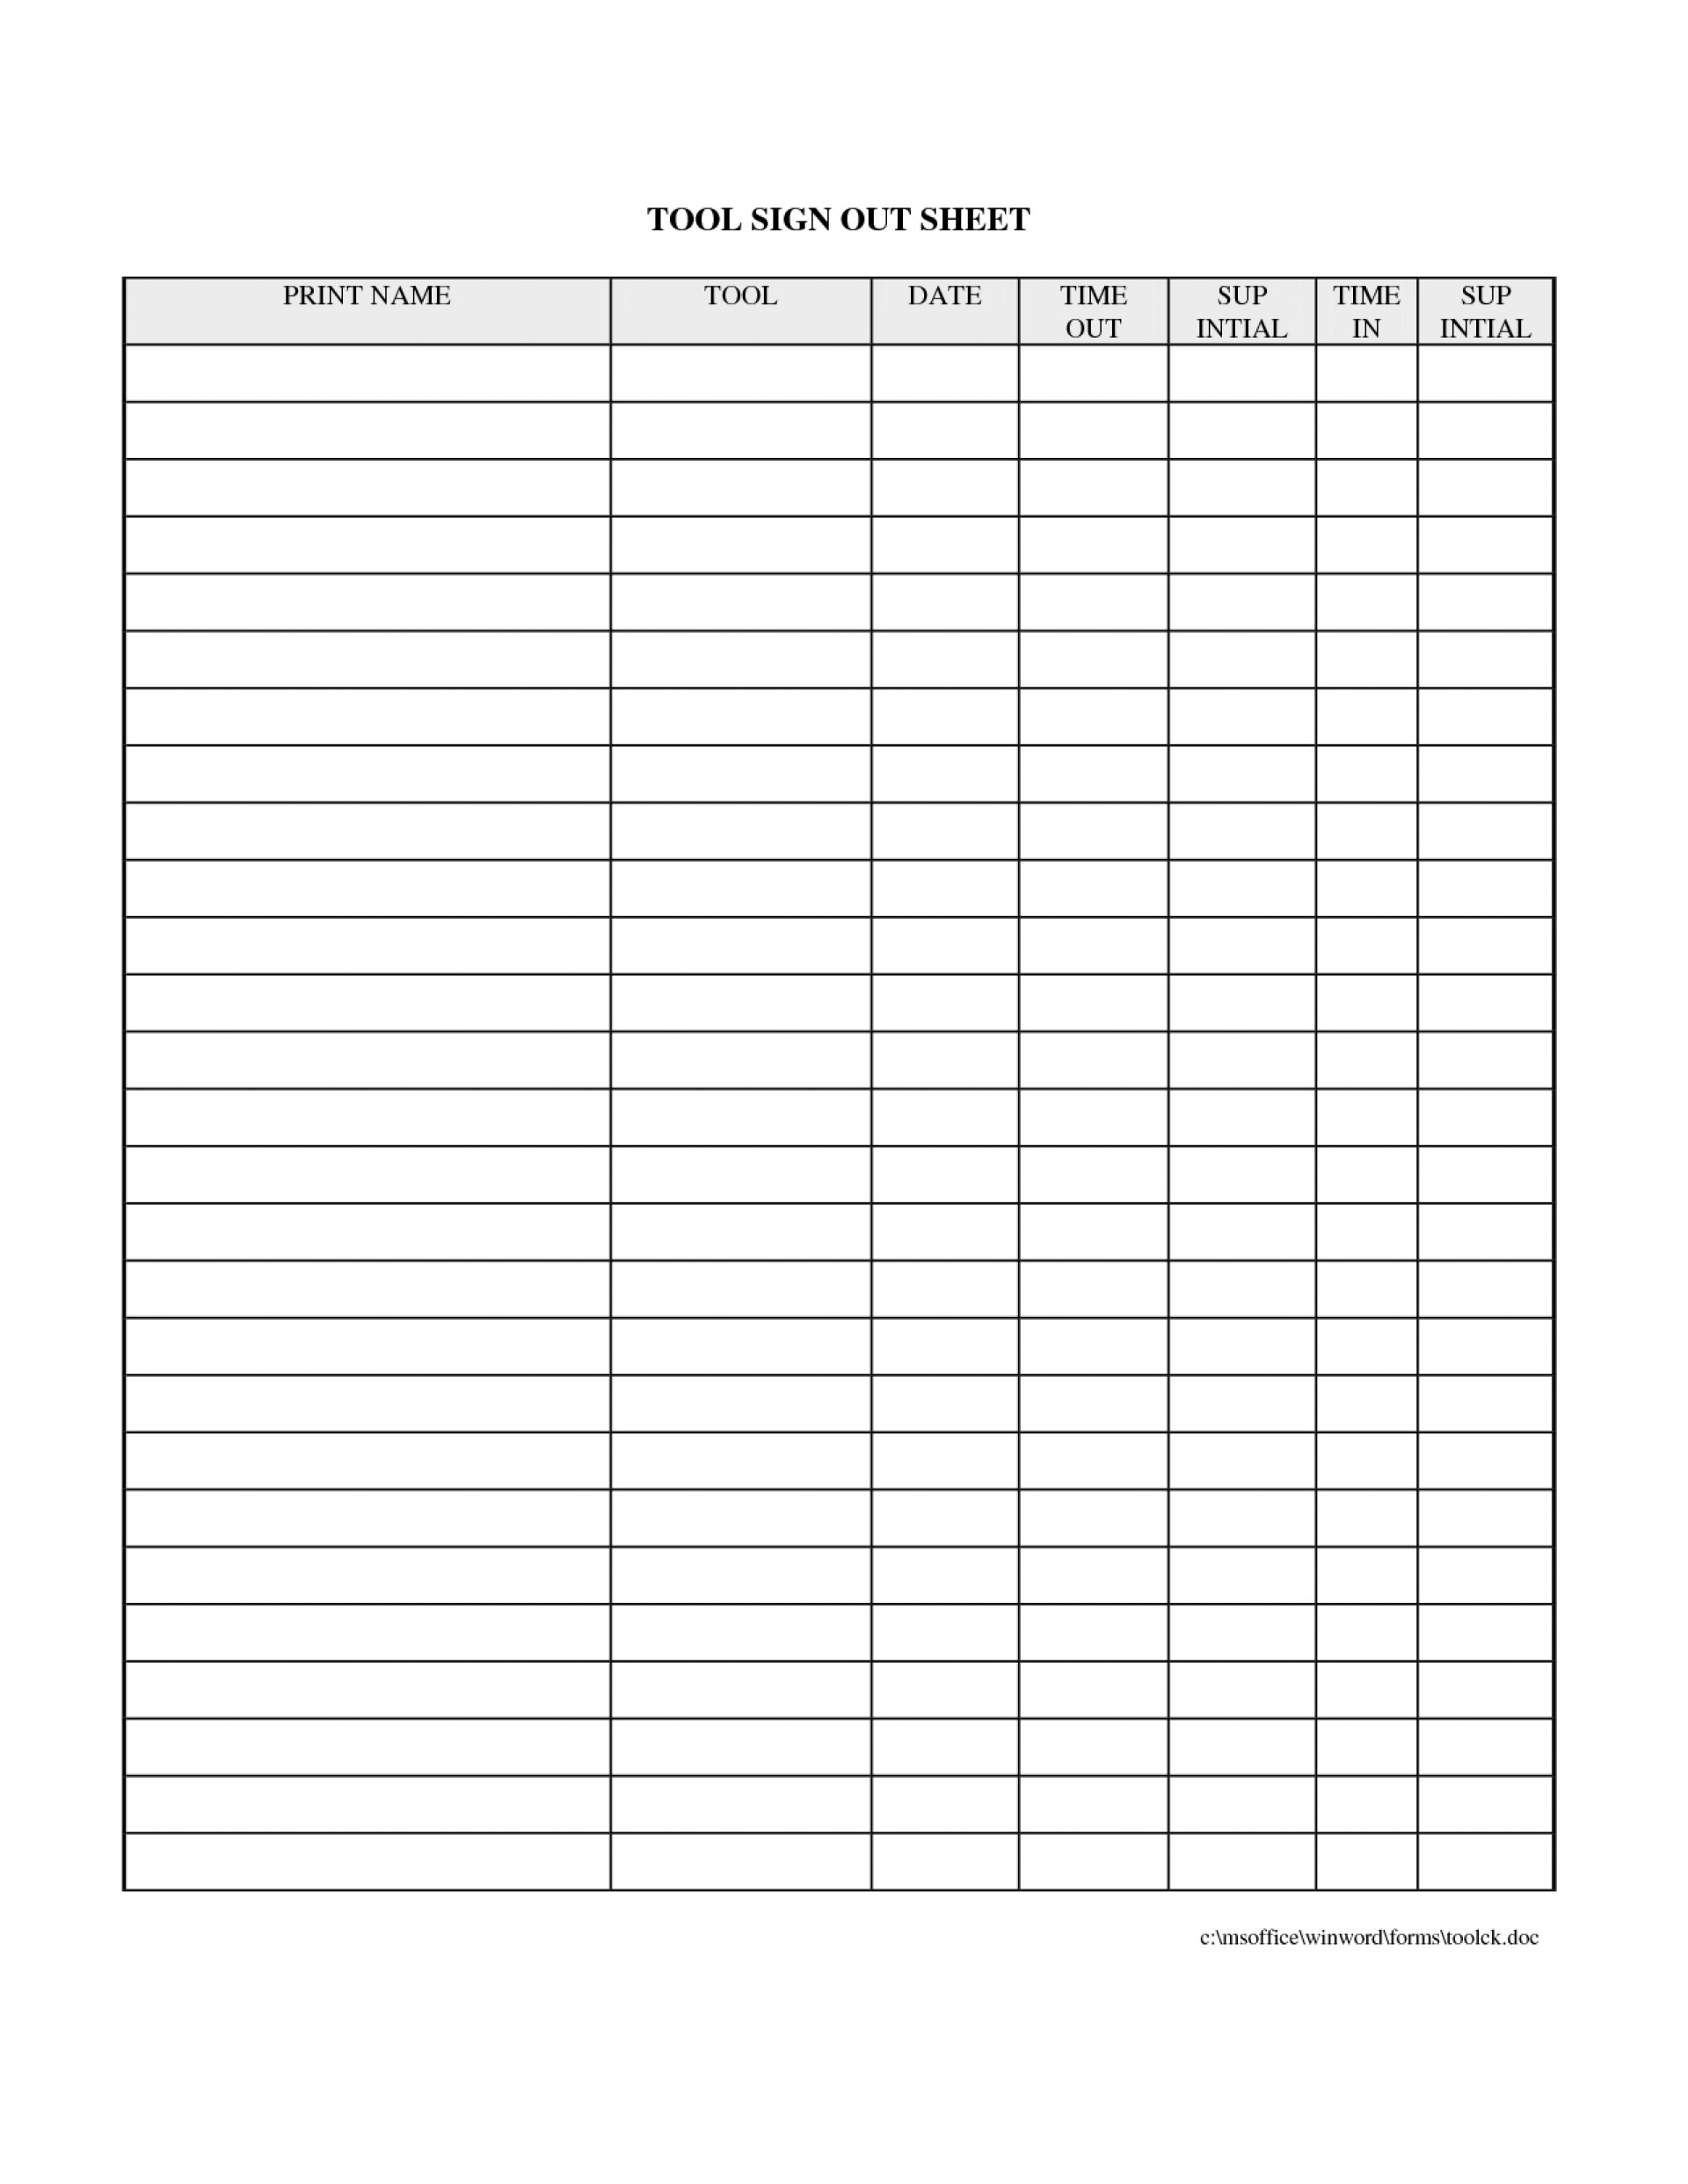 005 Sign In Sheets Template Staggering Ideas Elementary School Open - Free Printable Sign In And Out Sheets